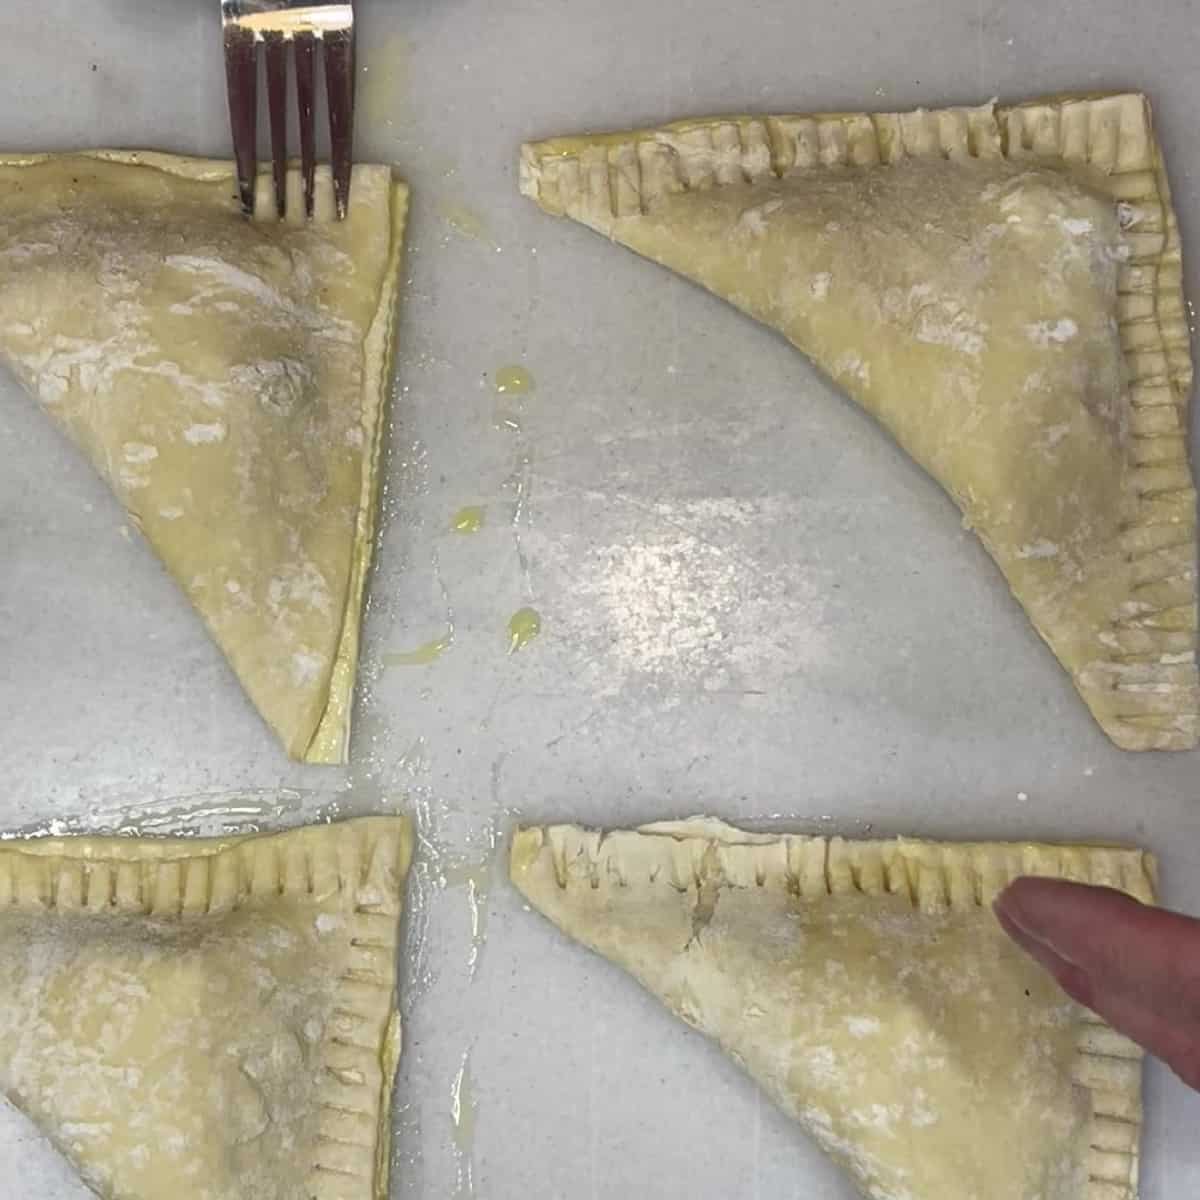 A fork pressing the edges of pastry to make apple turnovers.